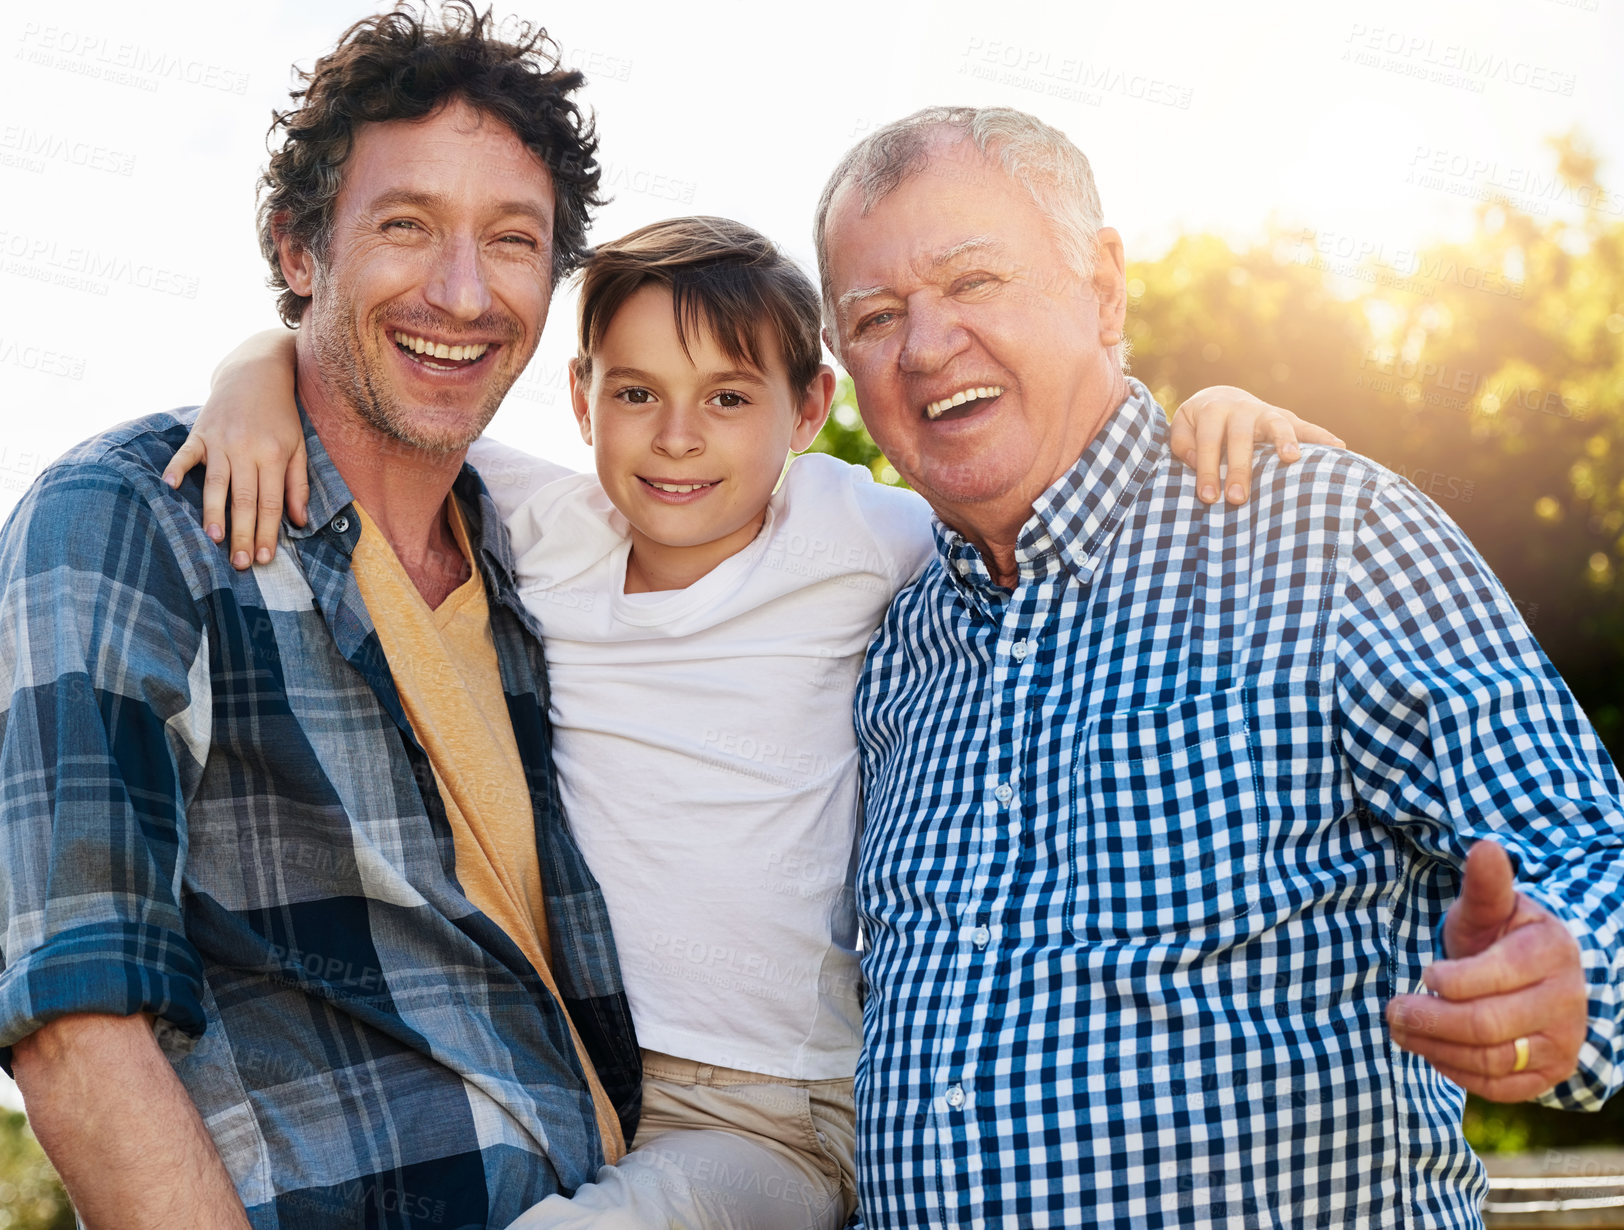 Buy stock photo Grandfather, father and boy with portrait in outdoor park for happiness, support and bonding together. Lens flare, family and generations of men with smile for legacy, morning walk or weekend break